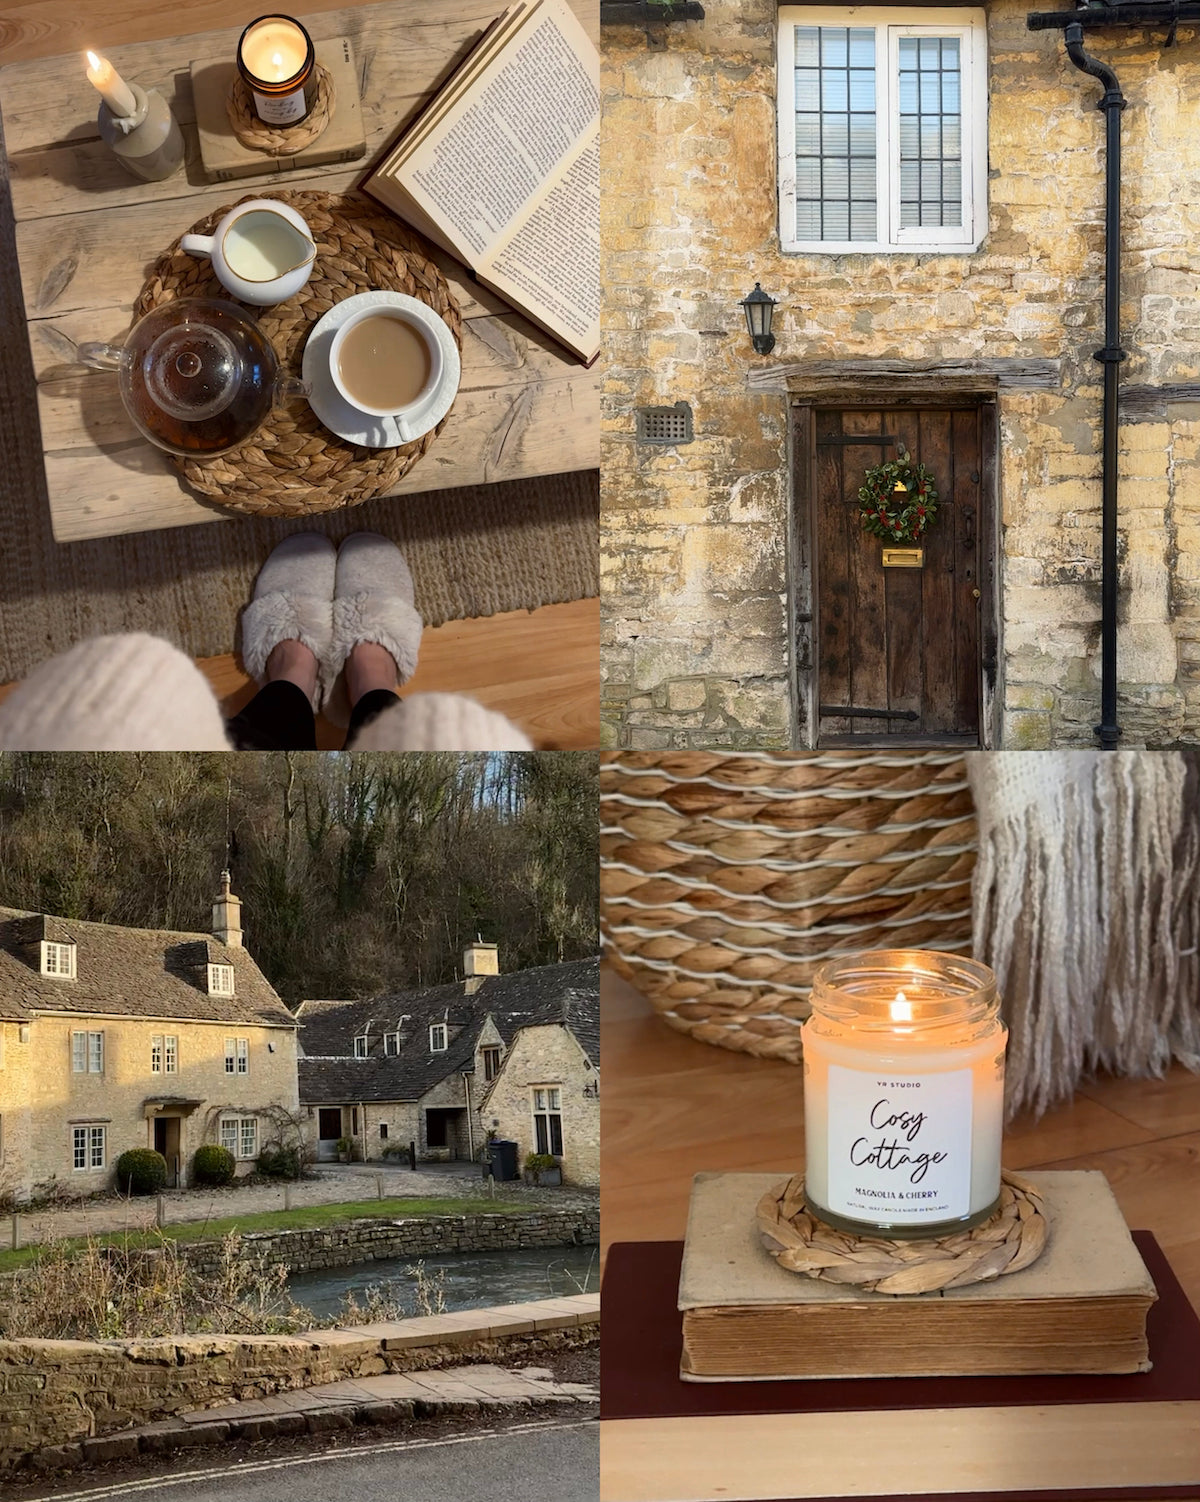 Transform Your New Build into a Cosy Cottage - Tips for a Rustic Home Makeover